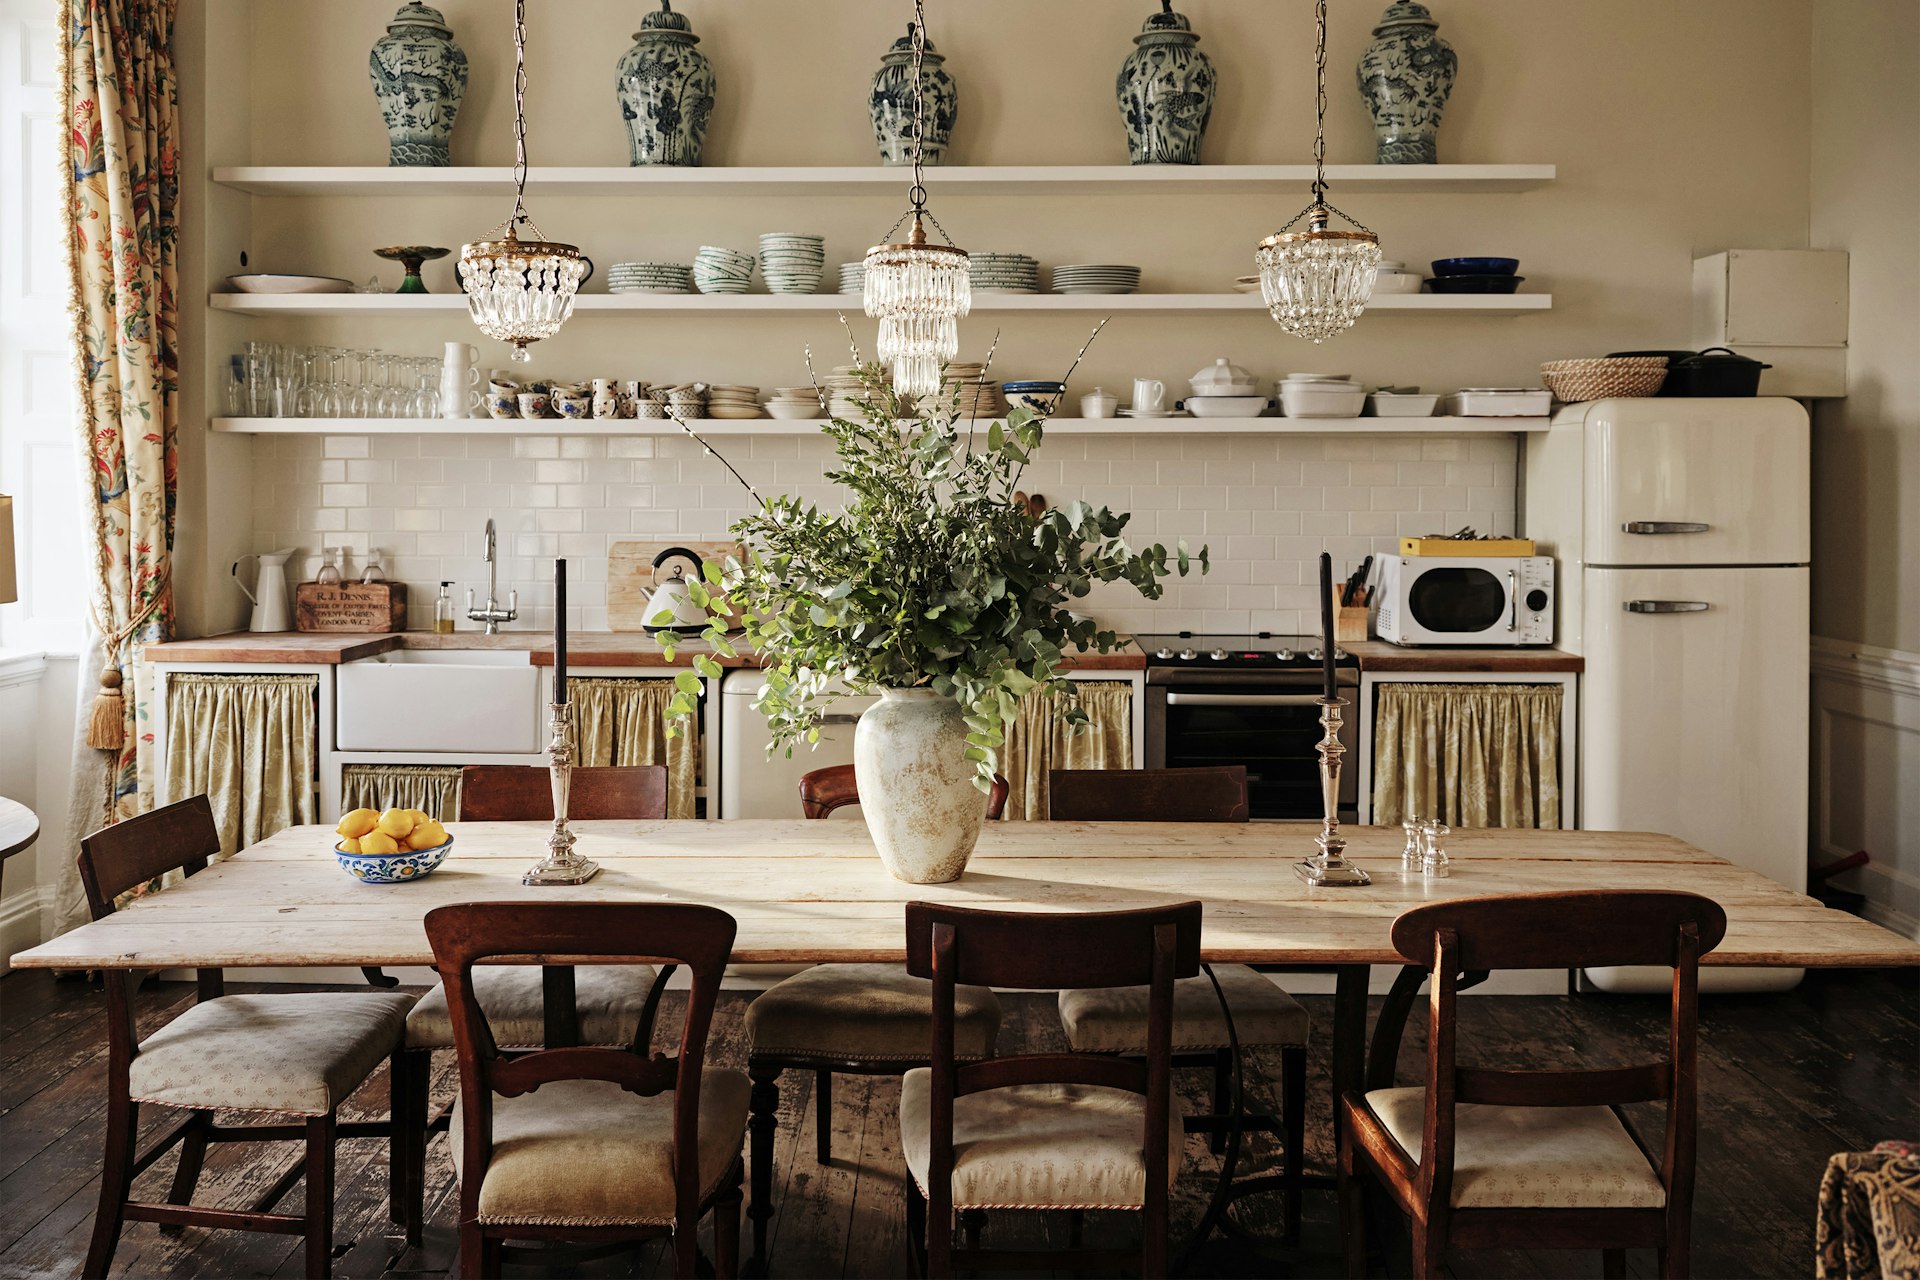 A kitchen with open shelving and a big dining table